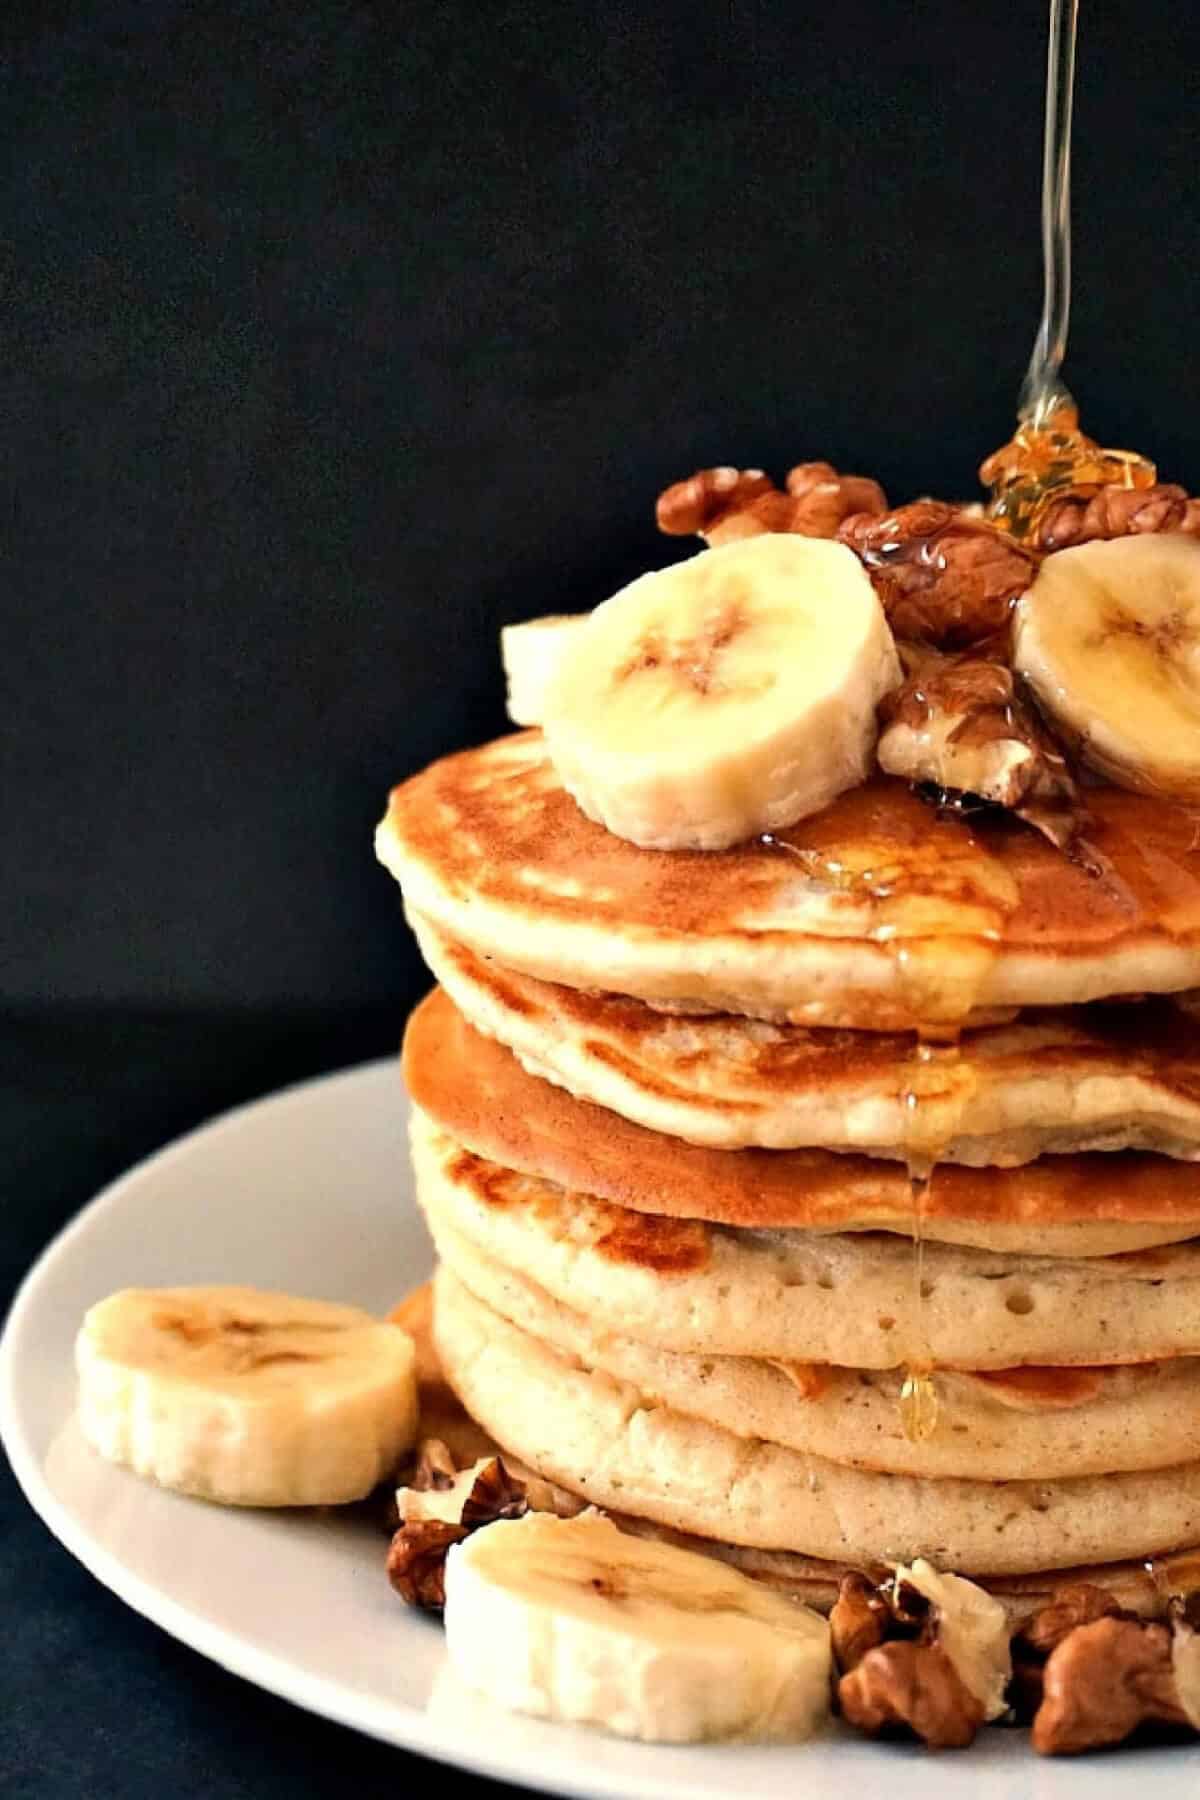 A pile of pancakes topped with walnuts and banana slices, and honey being squeezed over.